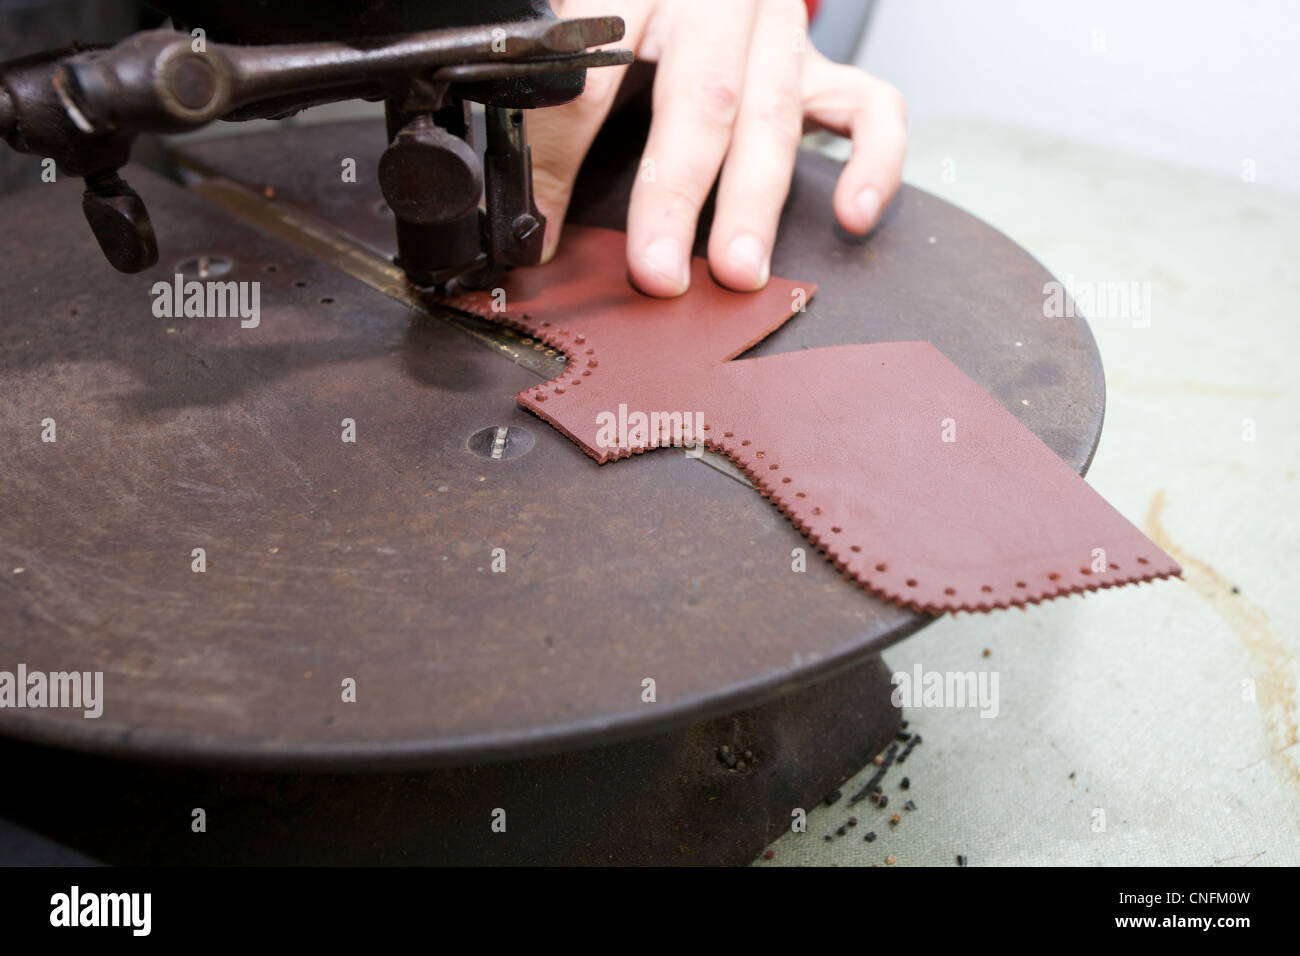 Shoe maker working on a piece of leather. Stock Photo